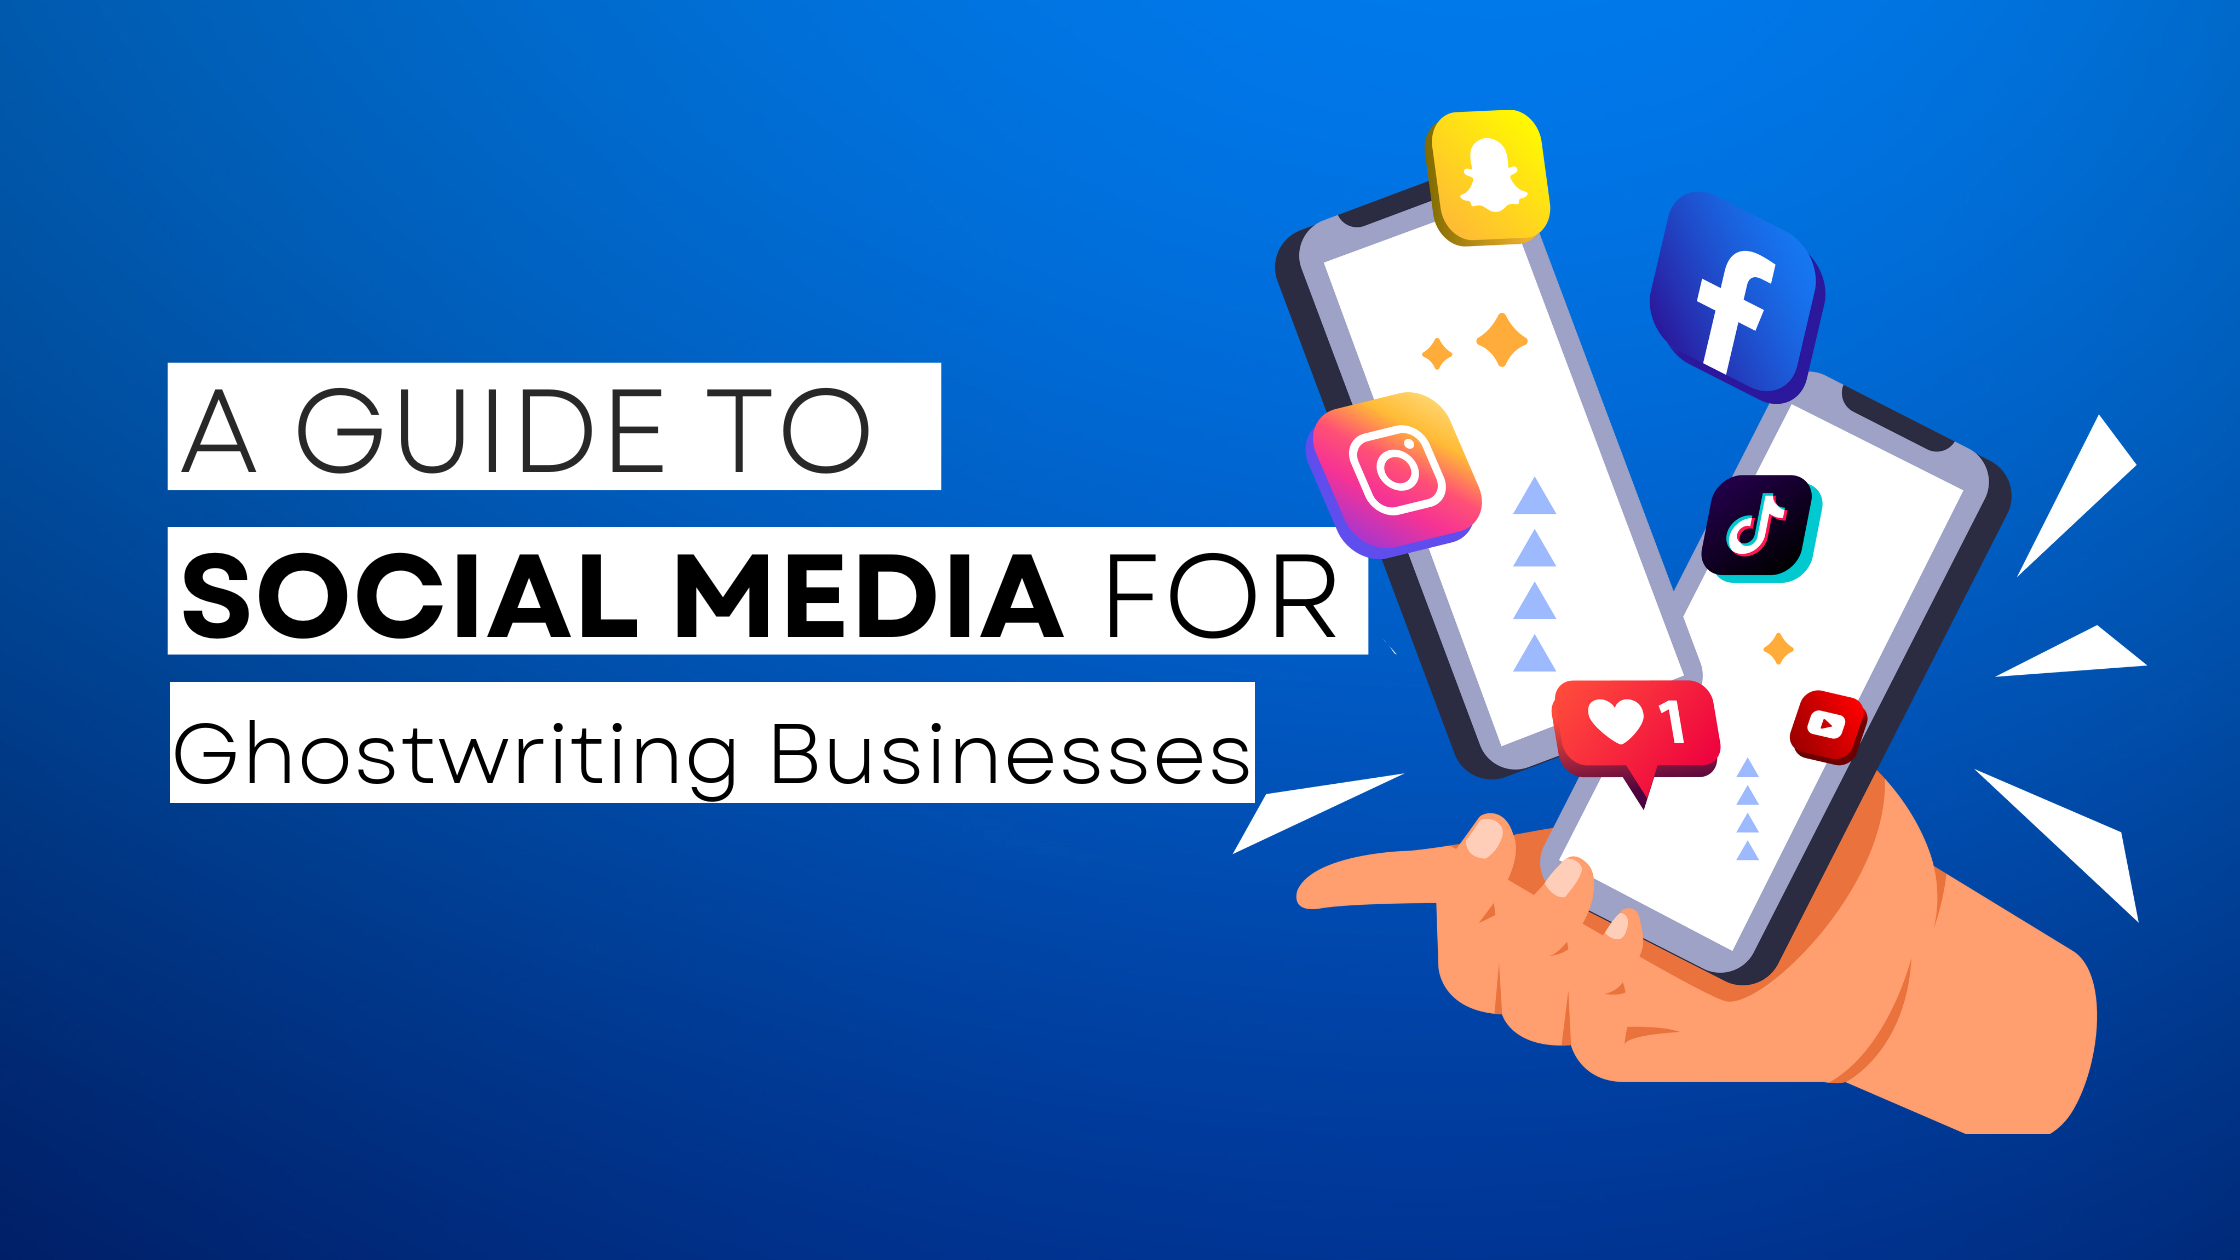 How to start Ghostwriting  on social media